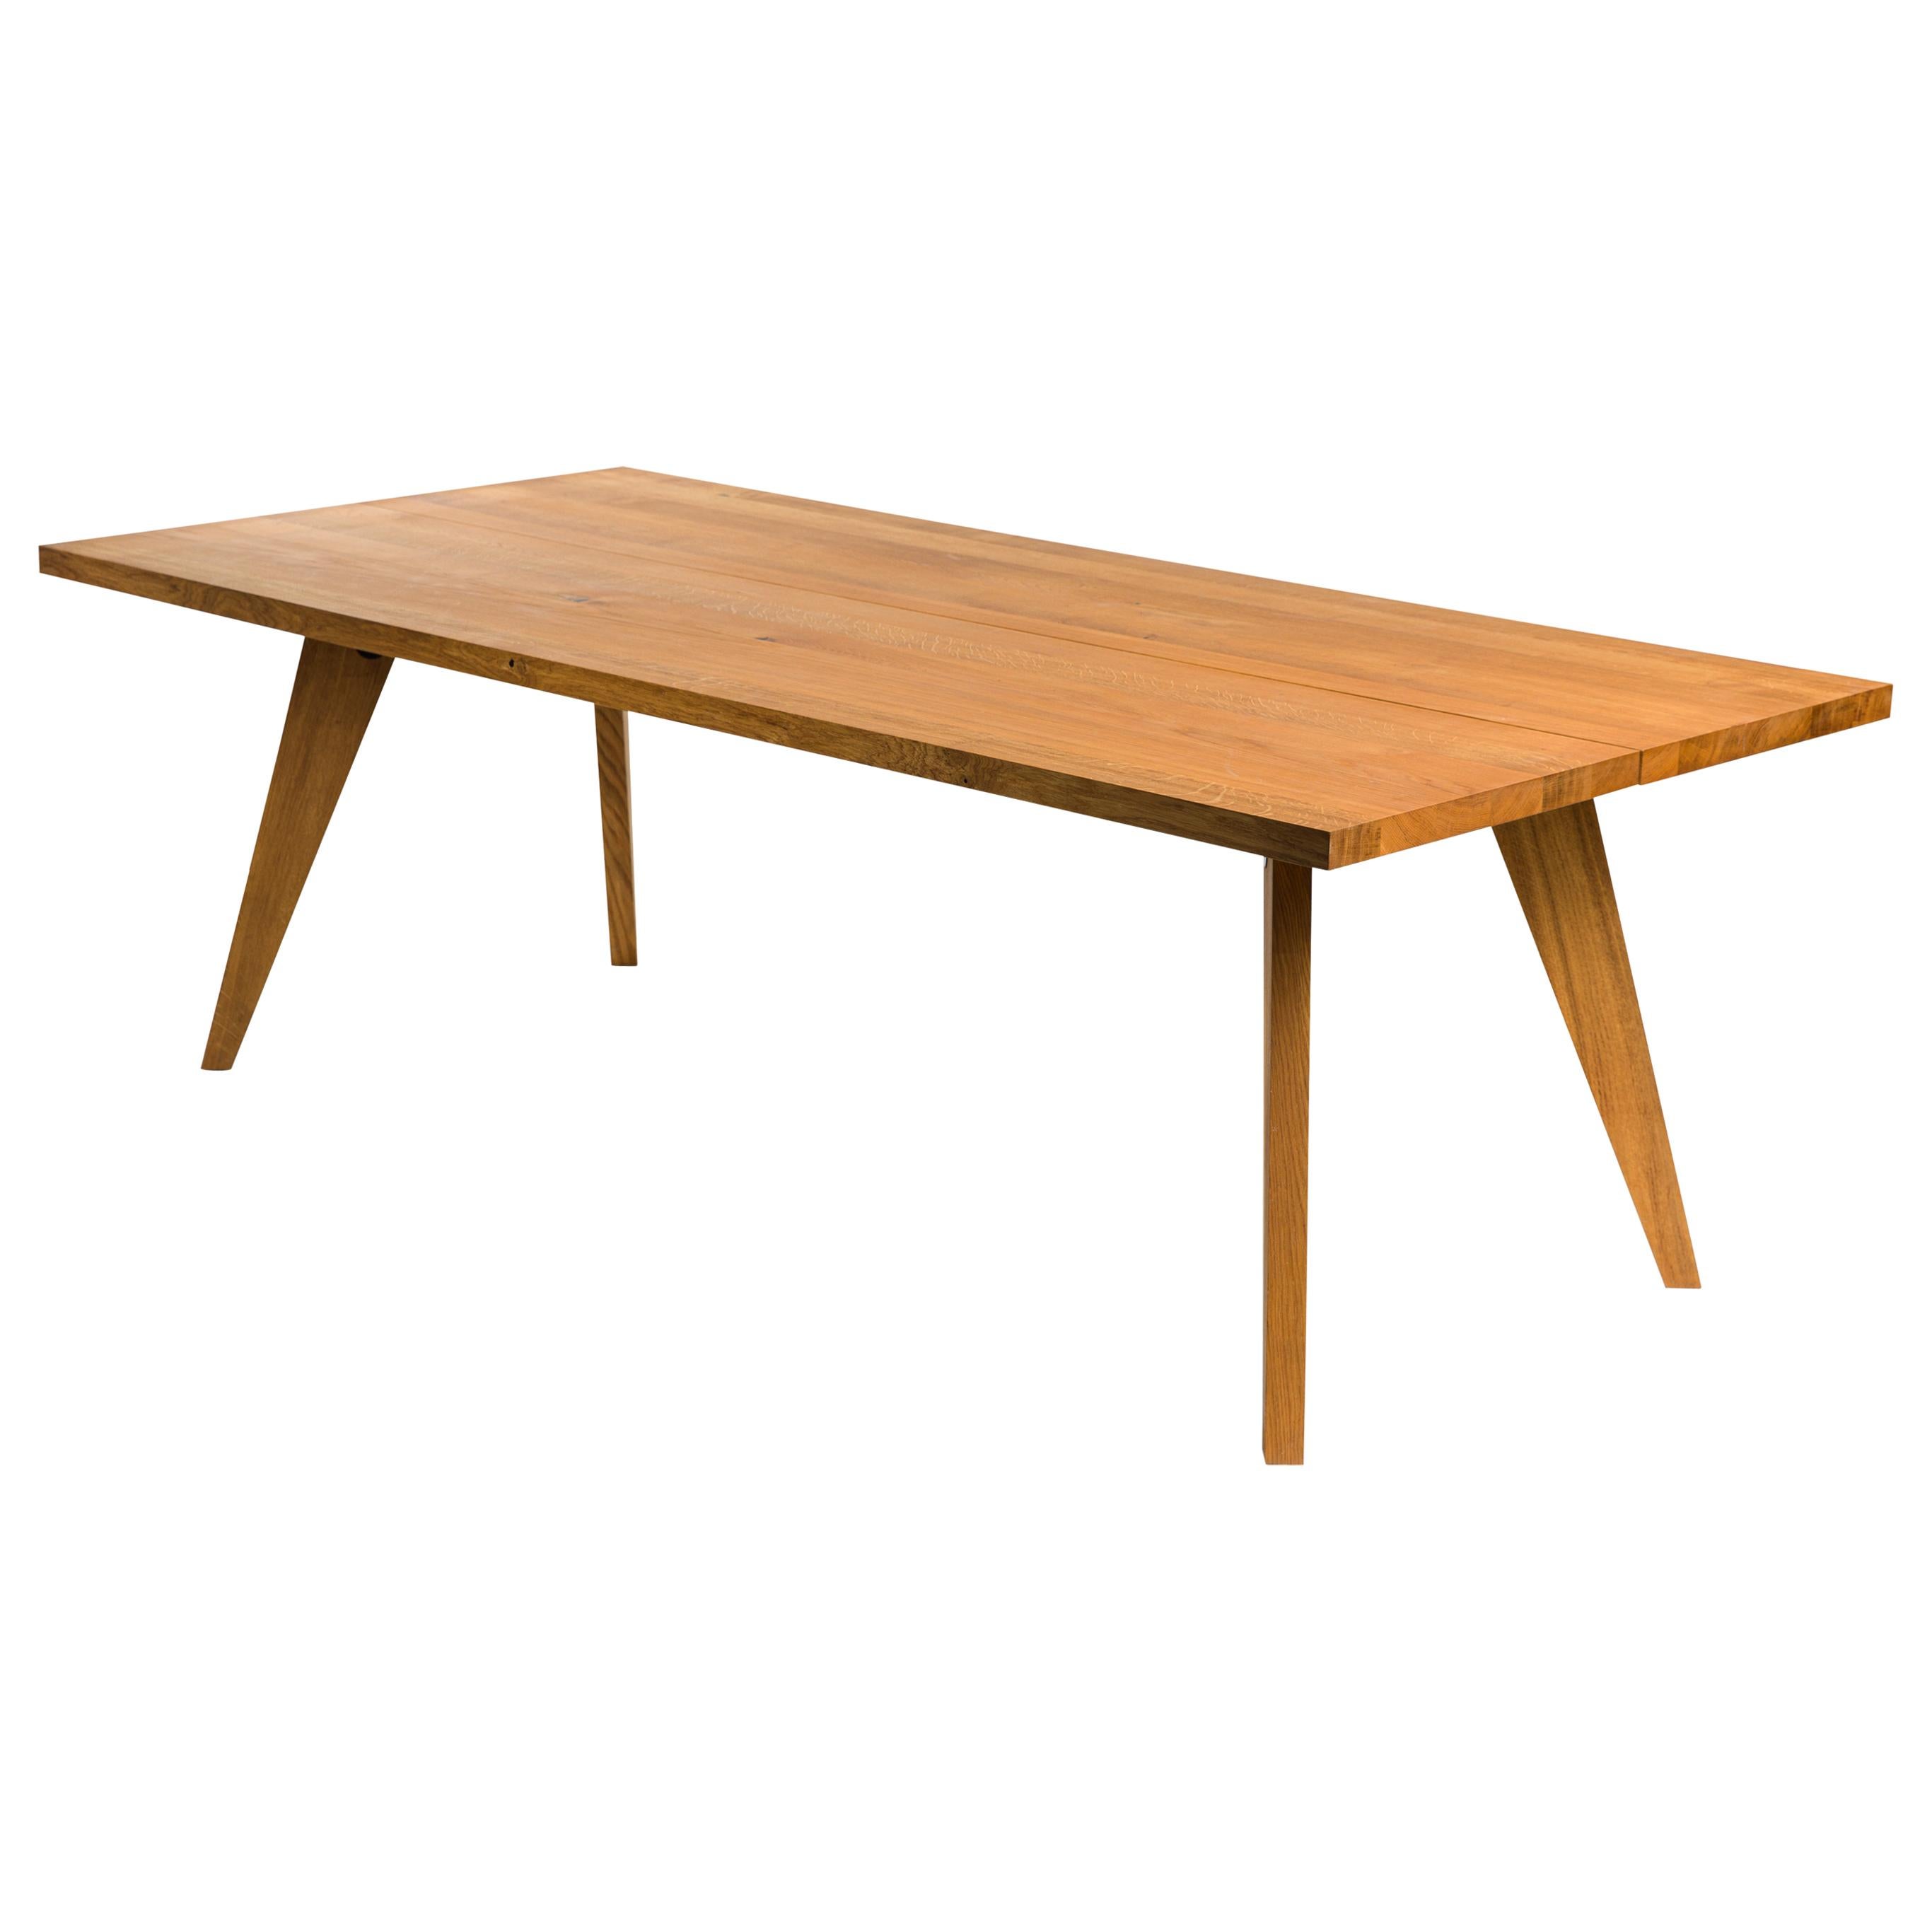 Plank Dining Table, Solid Oiled Danish Oak like New For Sale